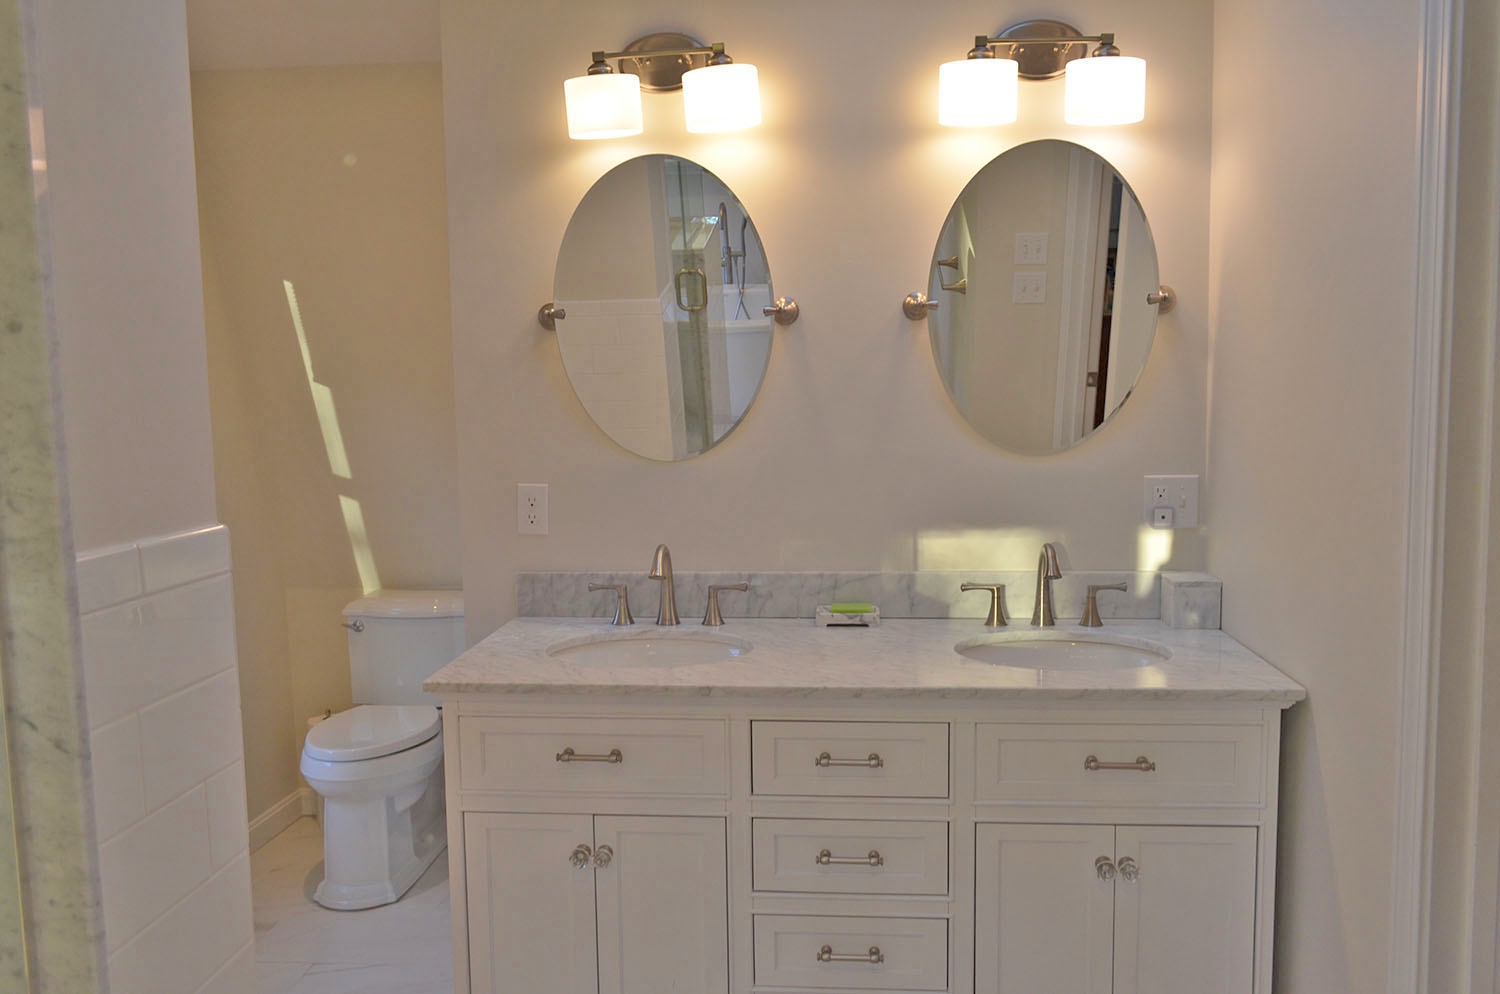 The generously-sized ensuite bath has a double vanity.